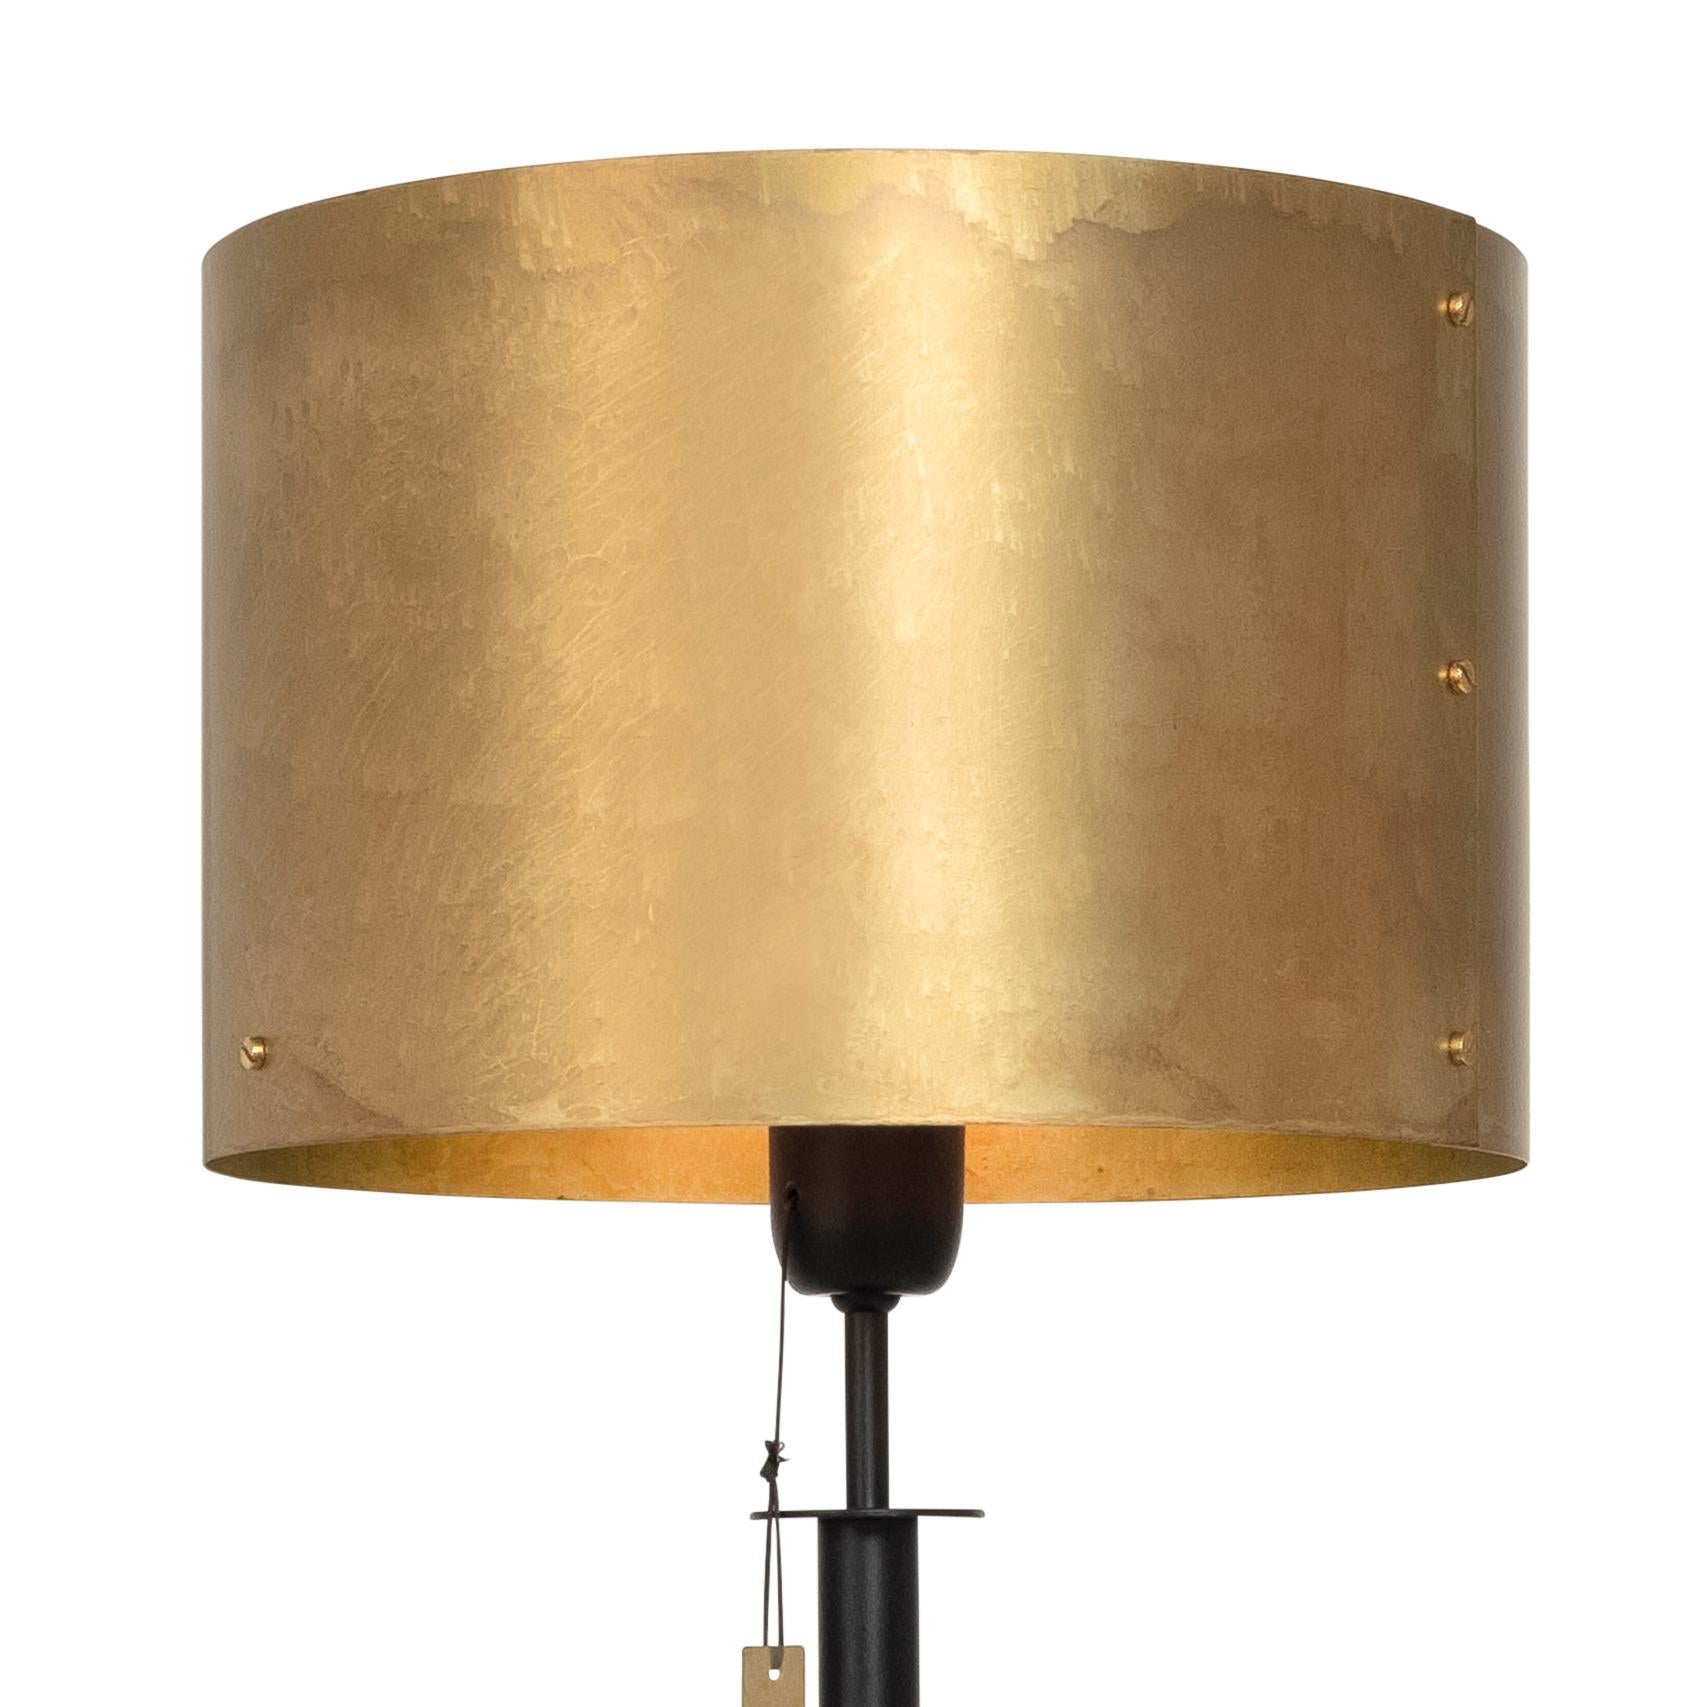 Lamp model Svep table lamp designed by Konsthantverk and manufactured by themselves.

The production of lamps, wall lights and floor lamps are manufactured using craftsman’s techniques with the same materials and techniques as the first